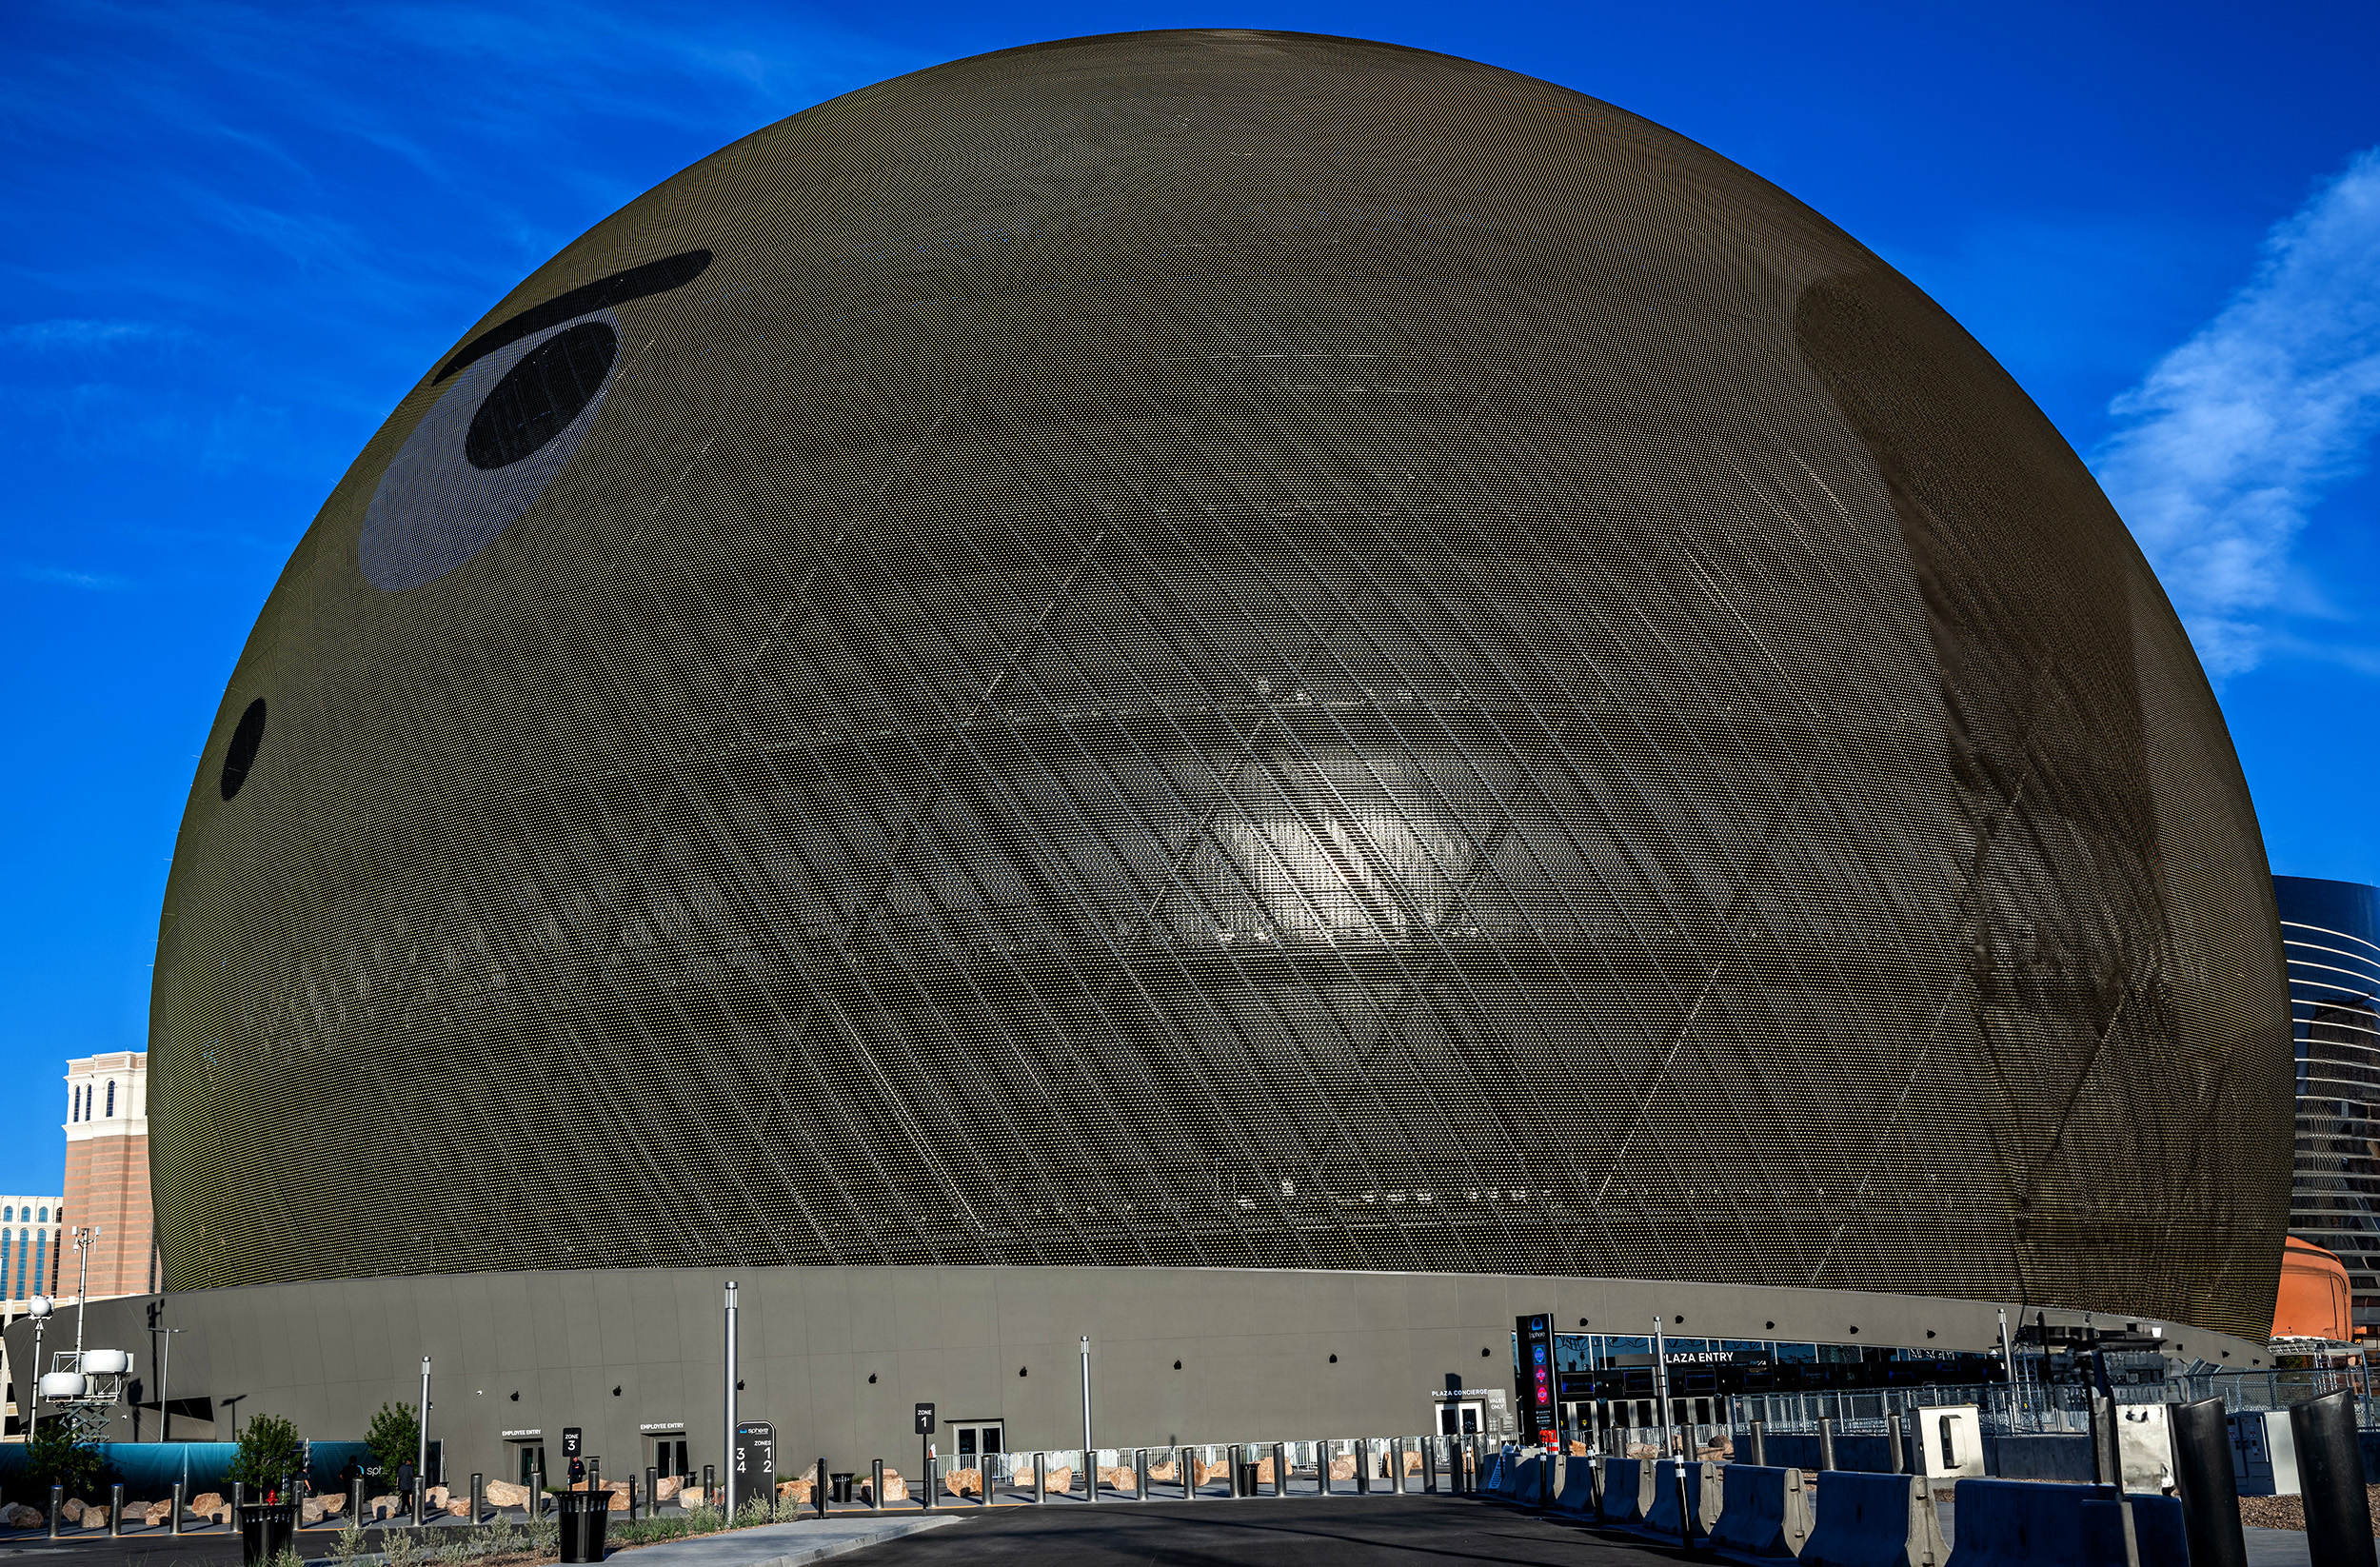 A large orb-like building structure